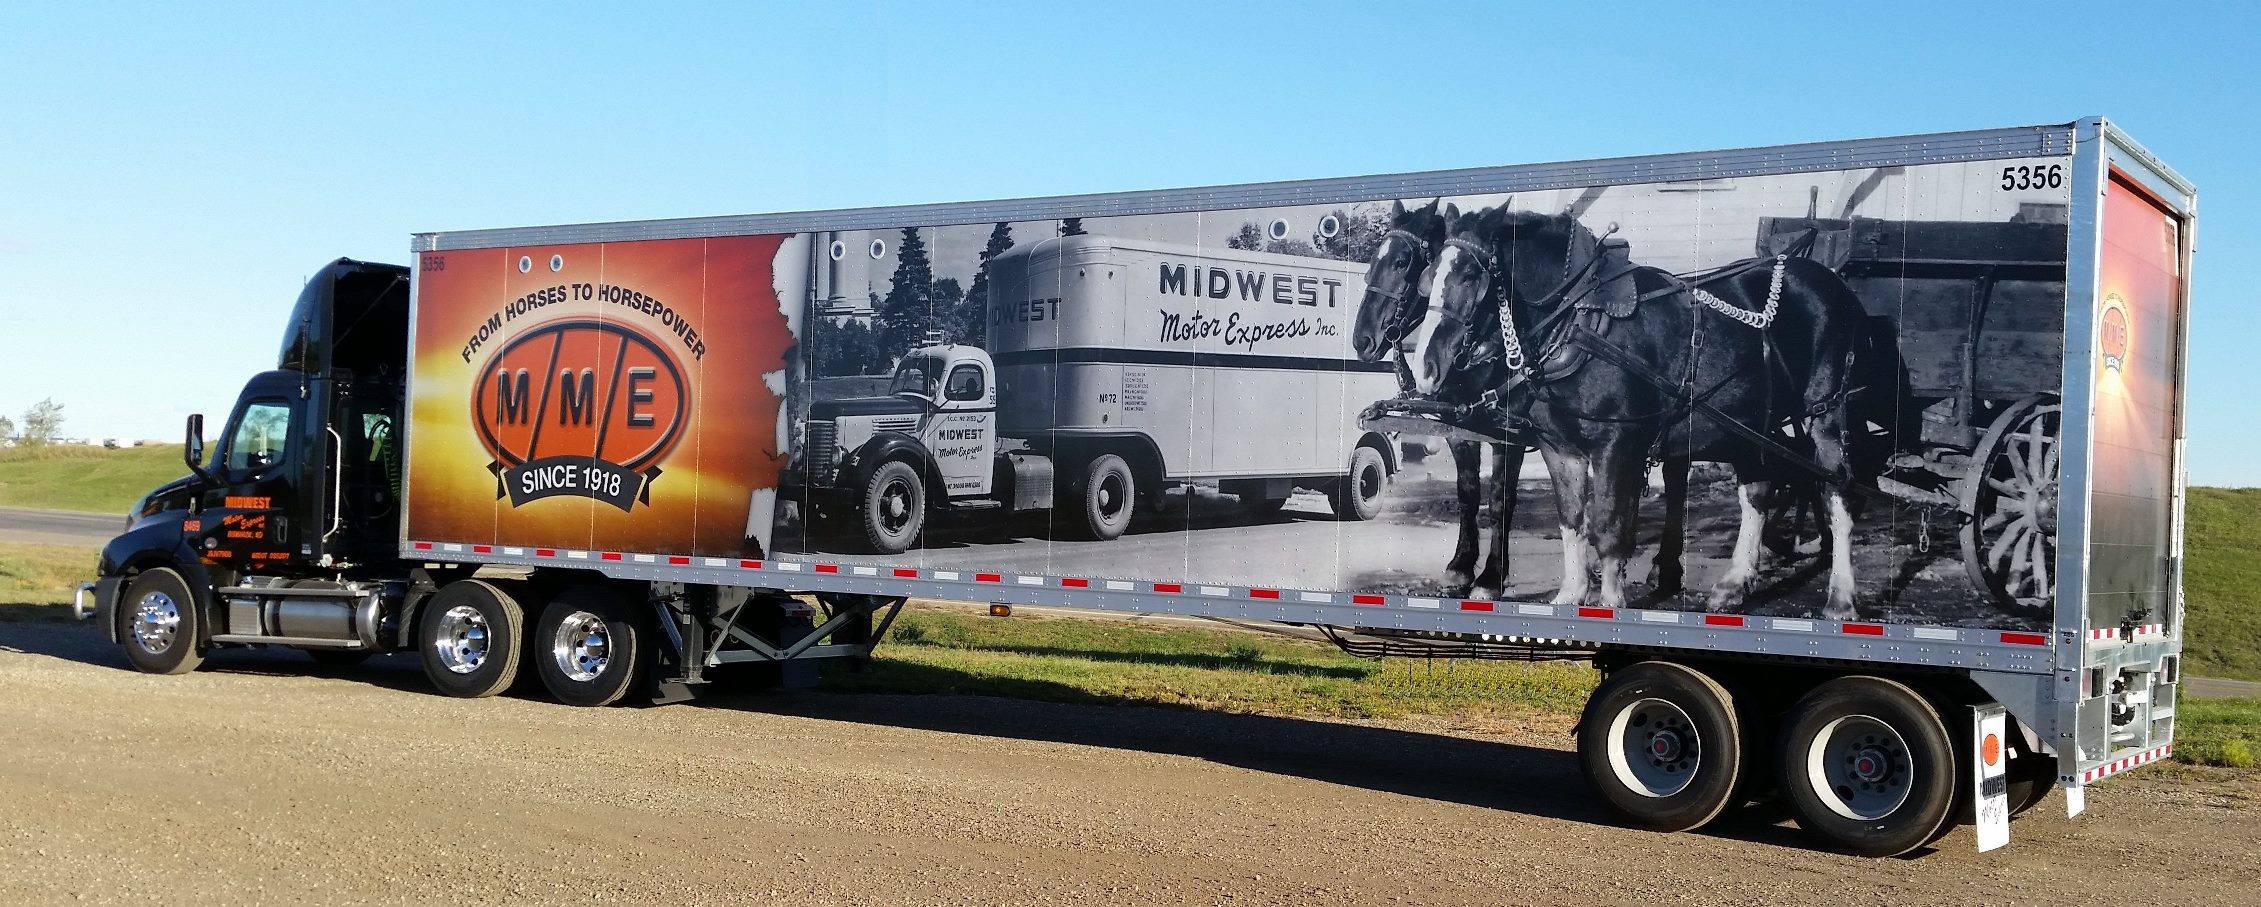 Midwest Motor Express Truck, Investors Acquire MME Inc, Investors Red Arts Capital has partnered with Prudential Capital Partners to acquire MME Inc. and its subsidiaries Midwest Motor Express and Midnite Express